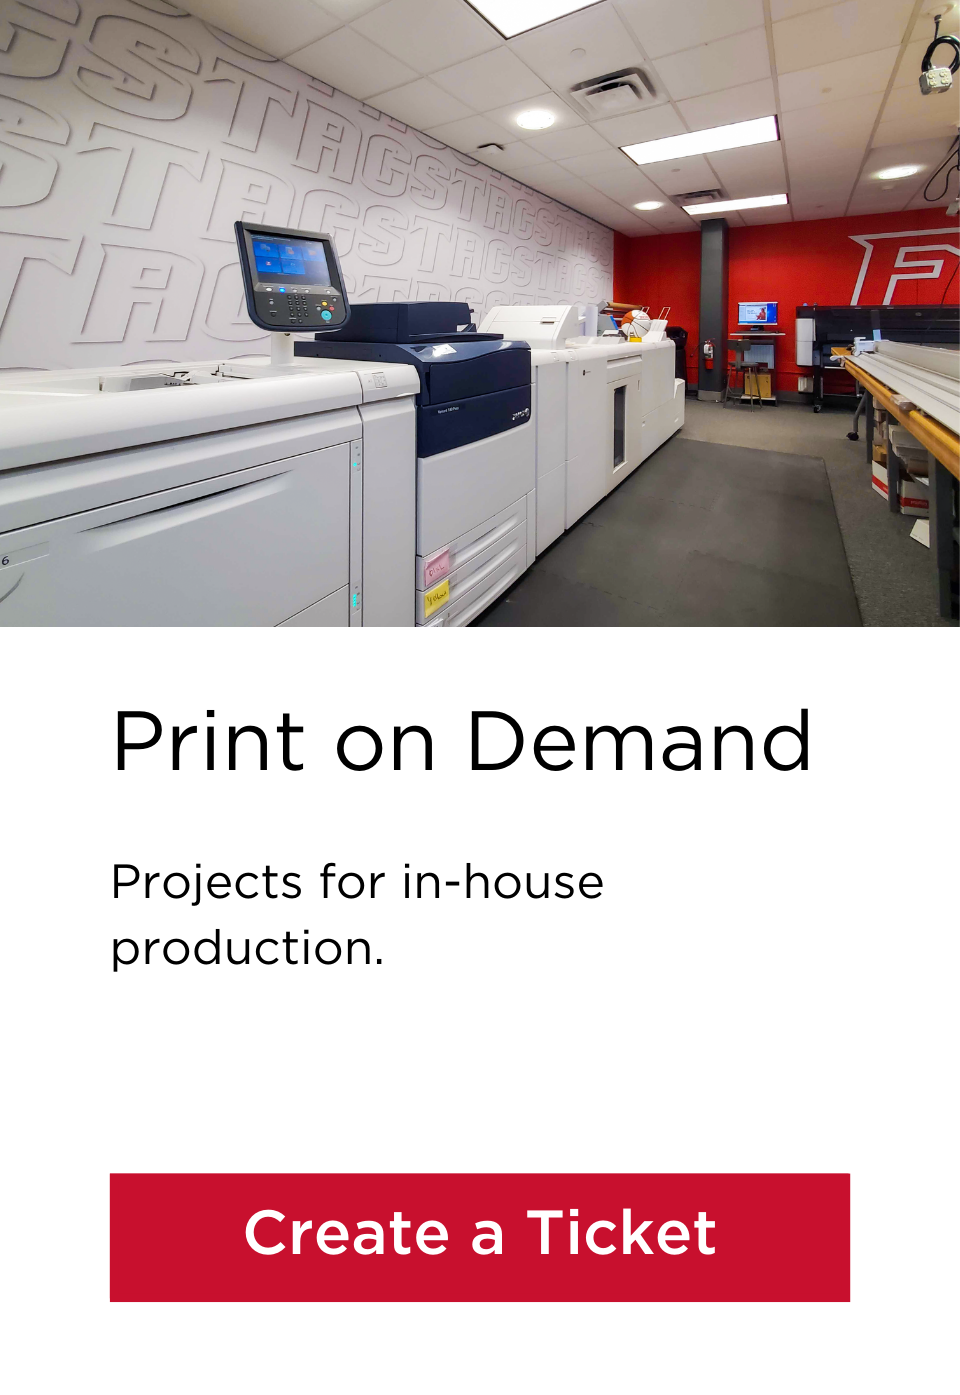 Print On-Demand. Projects for in-house production. Submit a Ticket.